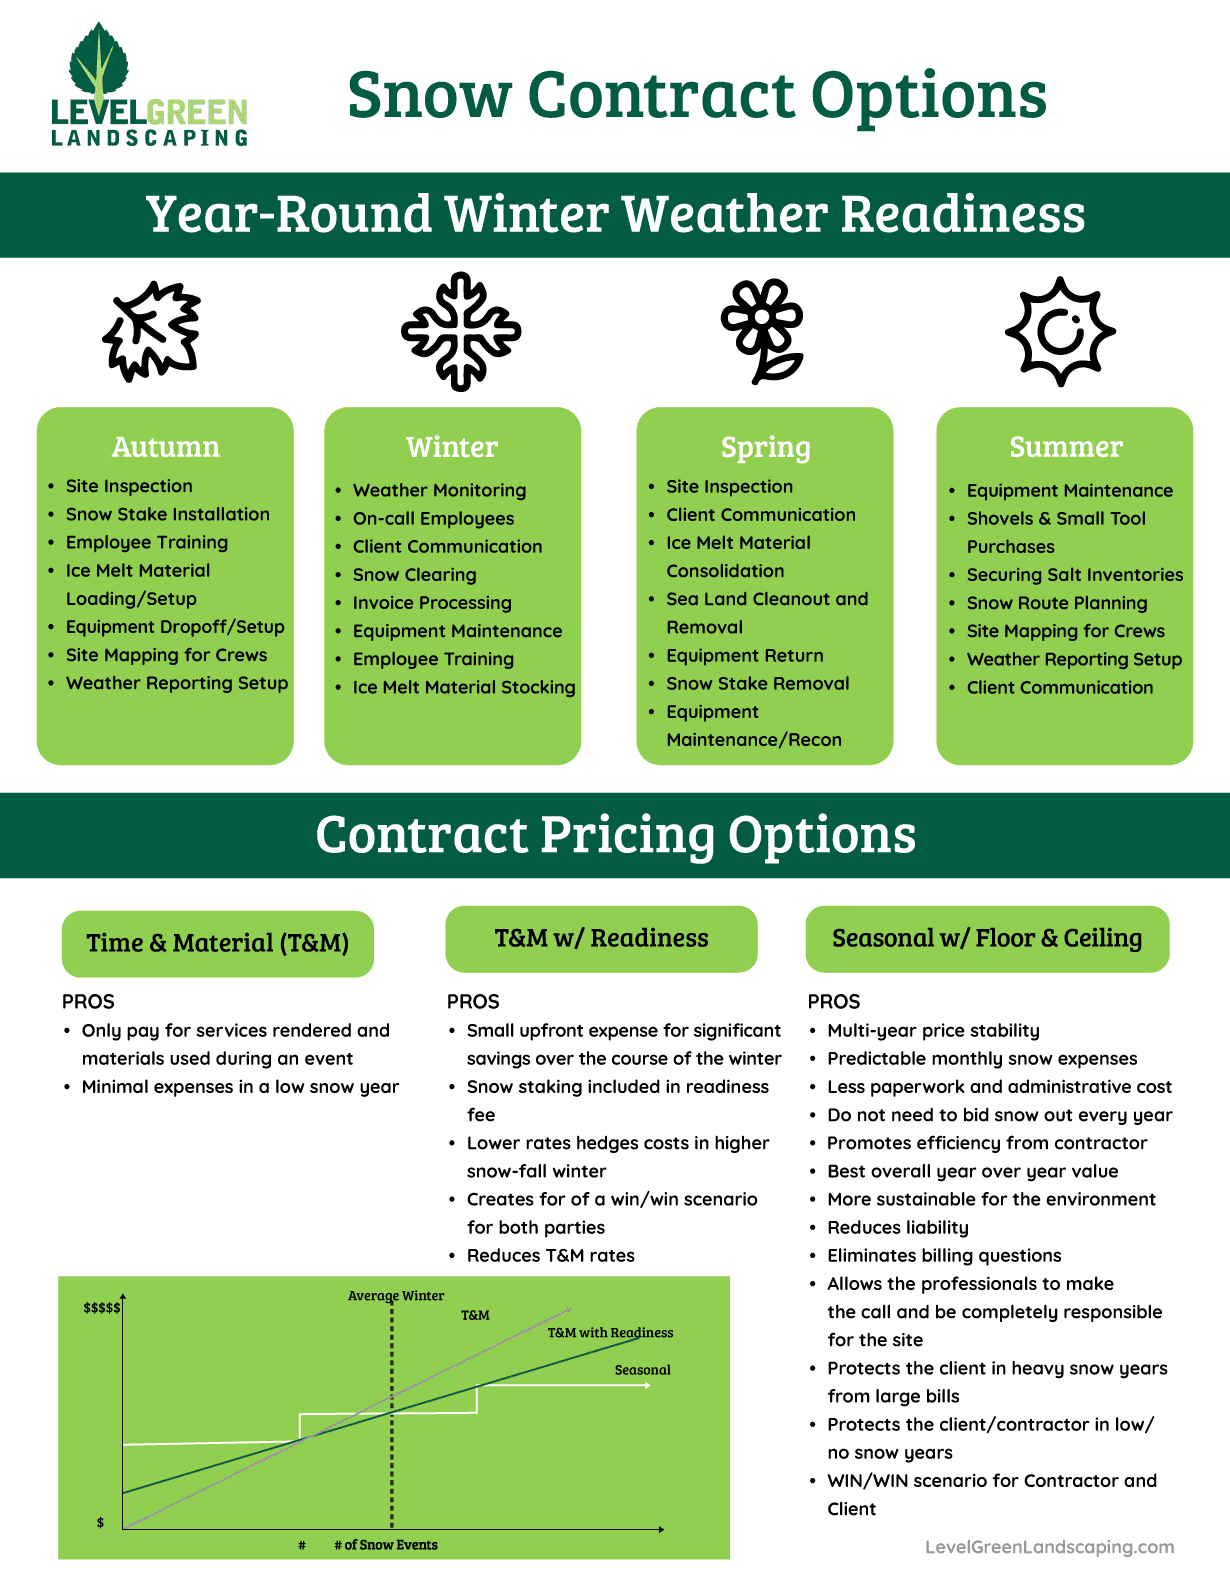 Level Green Landscaping Snow Contract Infographic